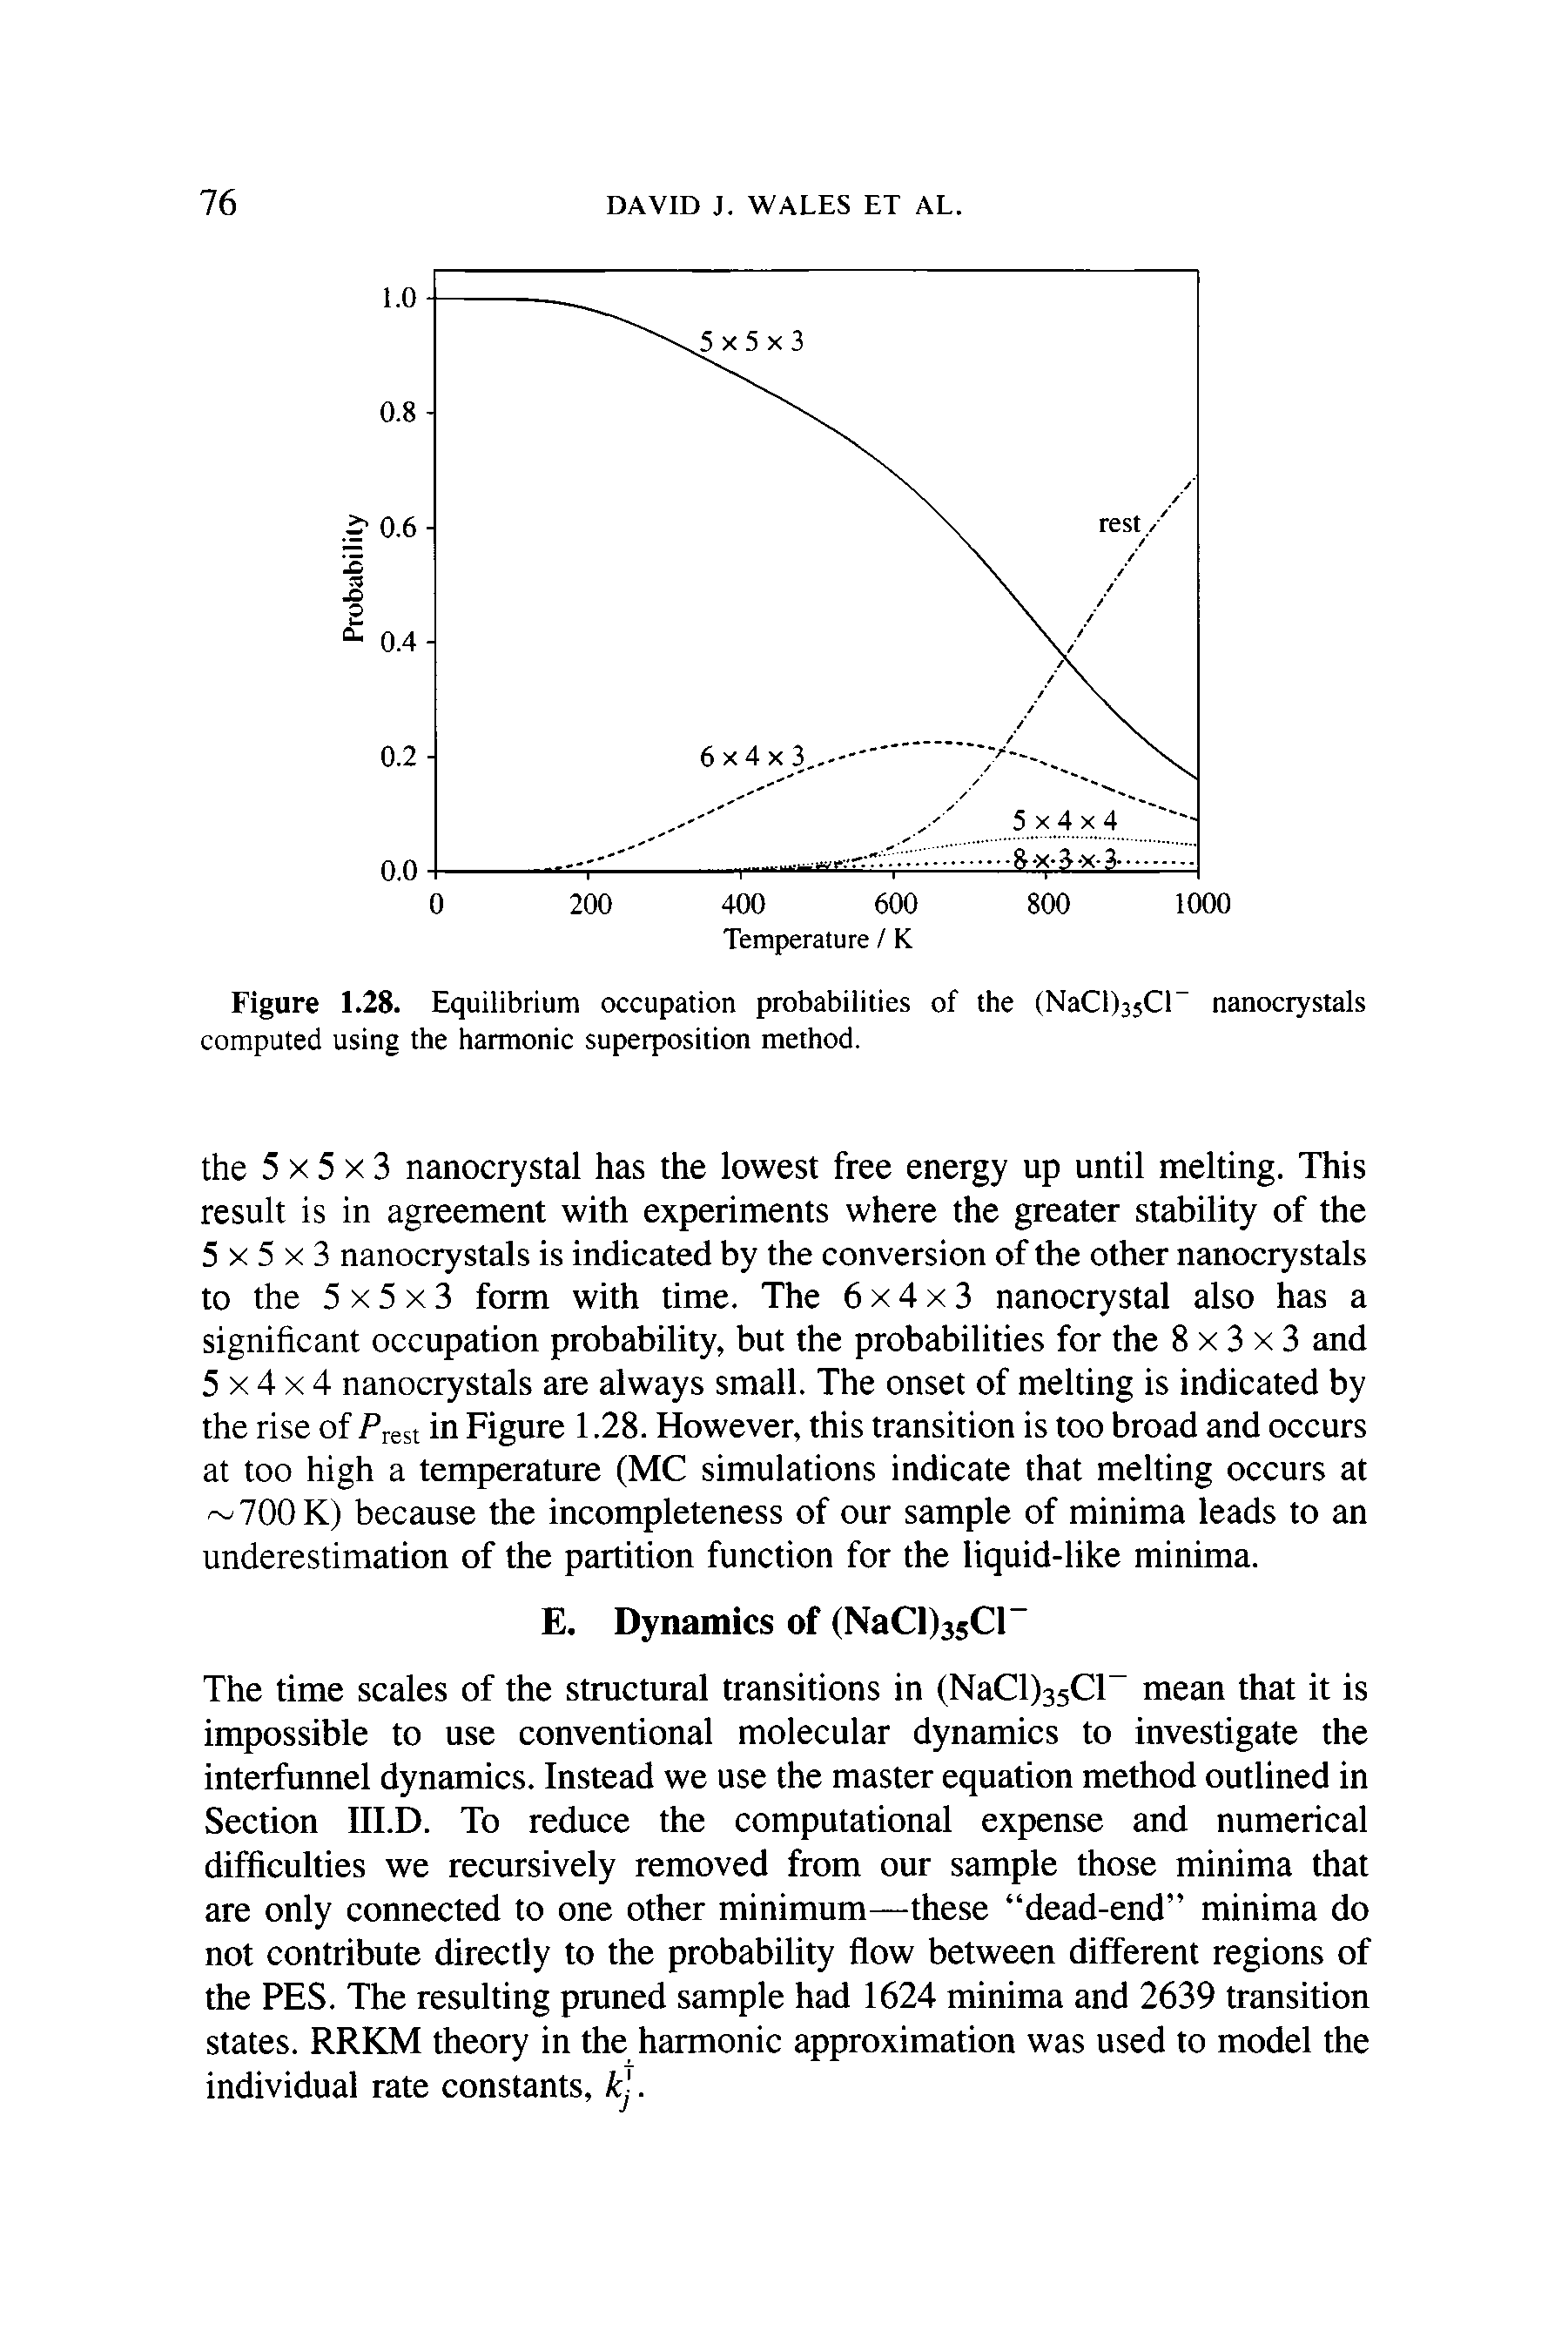 Figure 1.28. Equilibrium occupation probabilities of the (NaCOssCP nanocrystals computed using the harmonic superposition method.